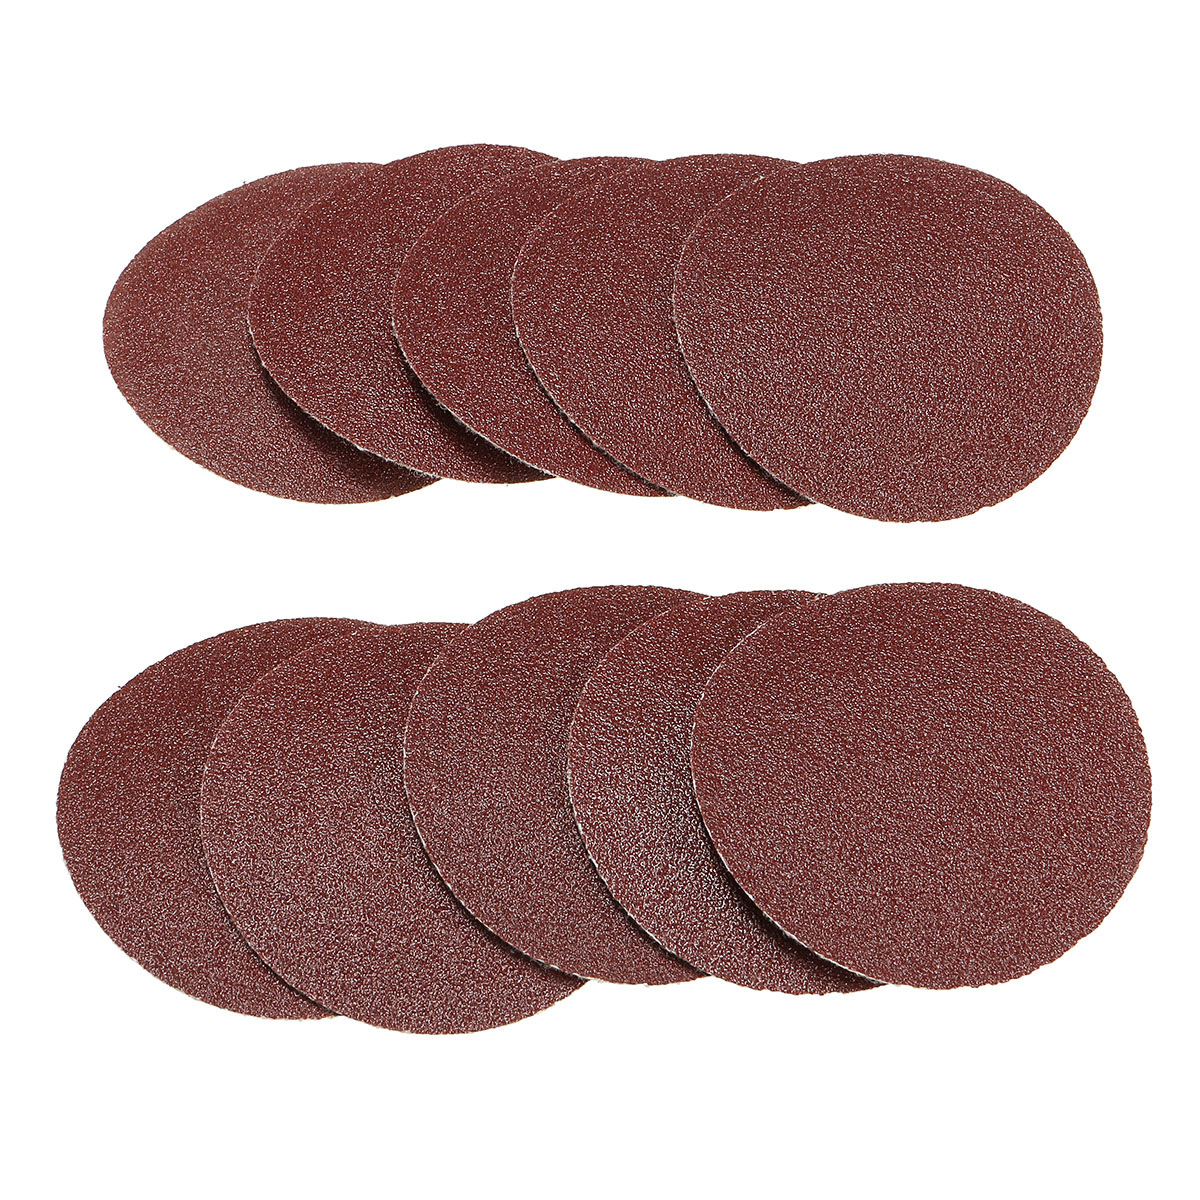 60pcs-3-Inch-6080120-Grit-Sandpaper-with-75mm-Hand-Polishing-Pad-for-Polishing-Abrasive-Tools-1680185-5